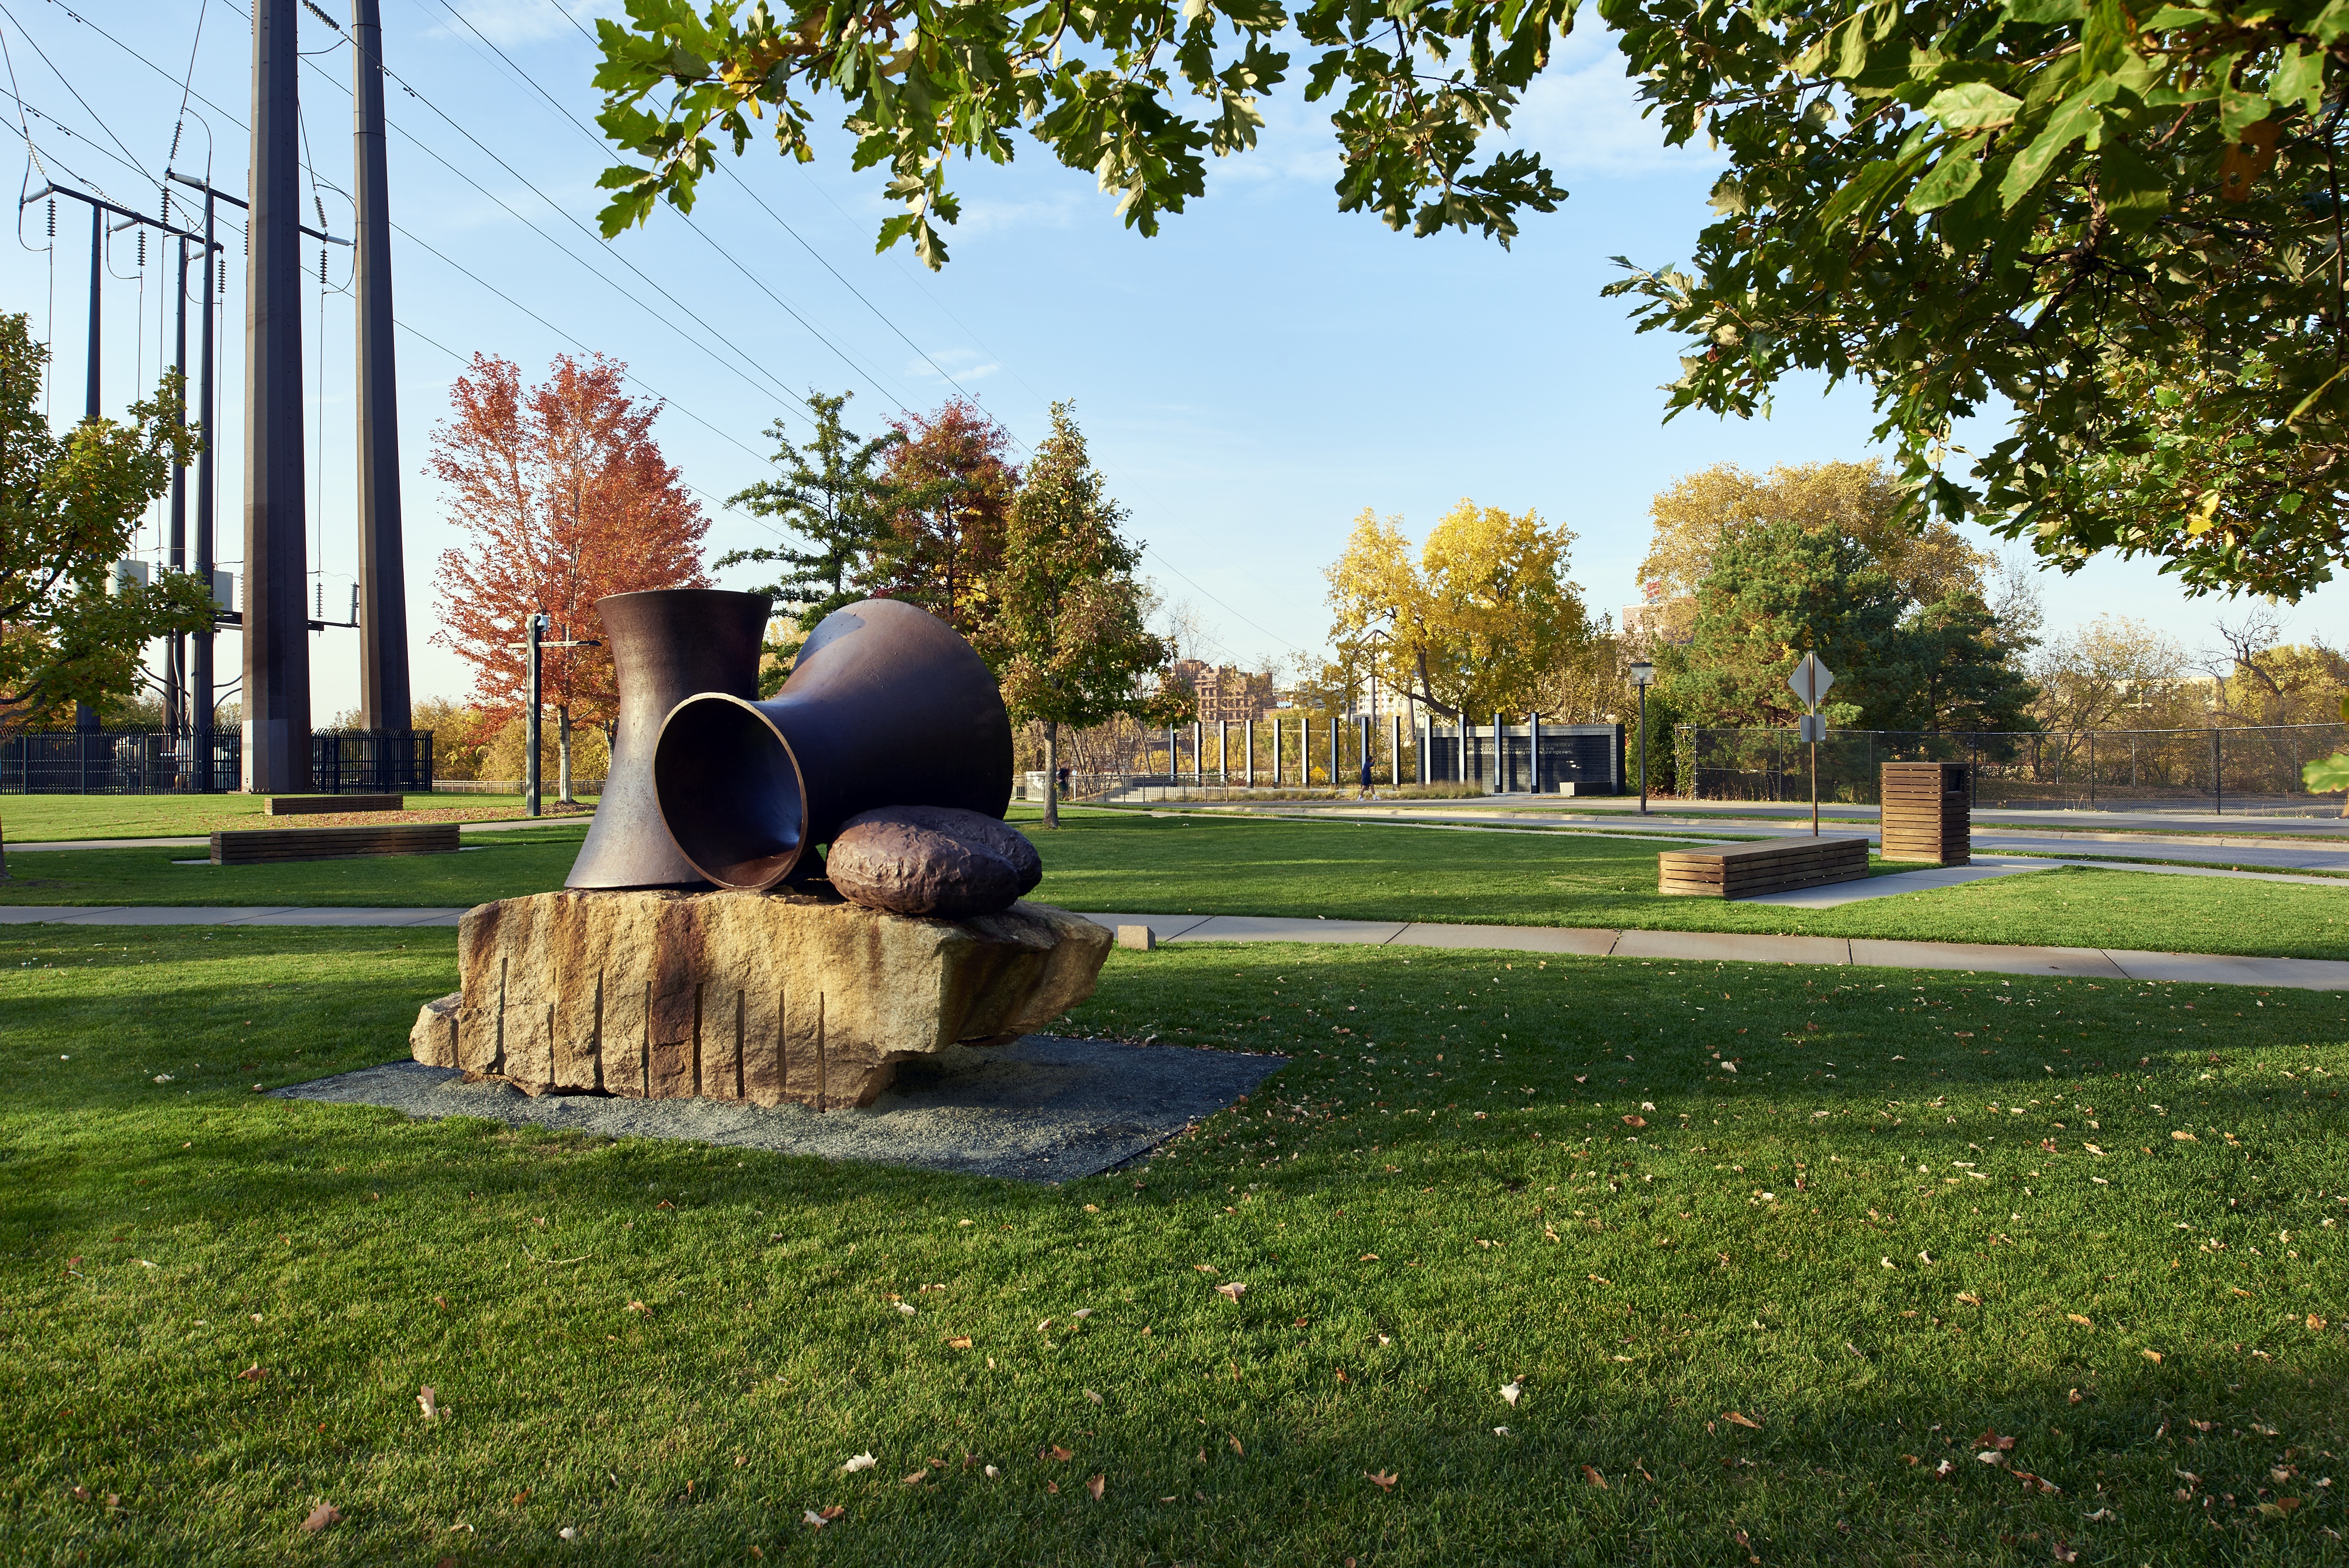 Tony Cragg, Ordovician, 1989, on loan to the City of Minneapolis and Gold Medal Park. Photo: George Heinrich, October 2016.